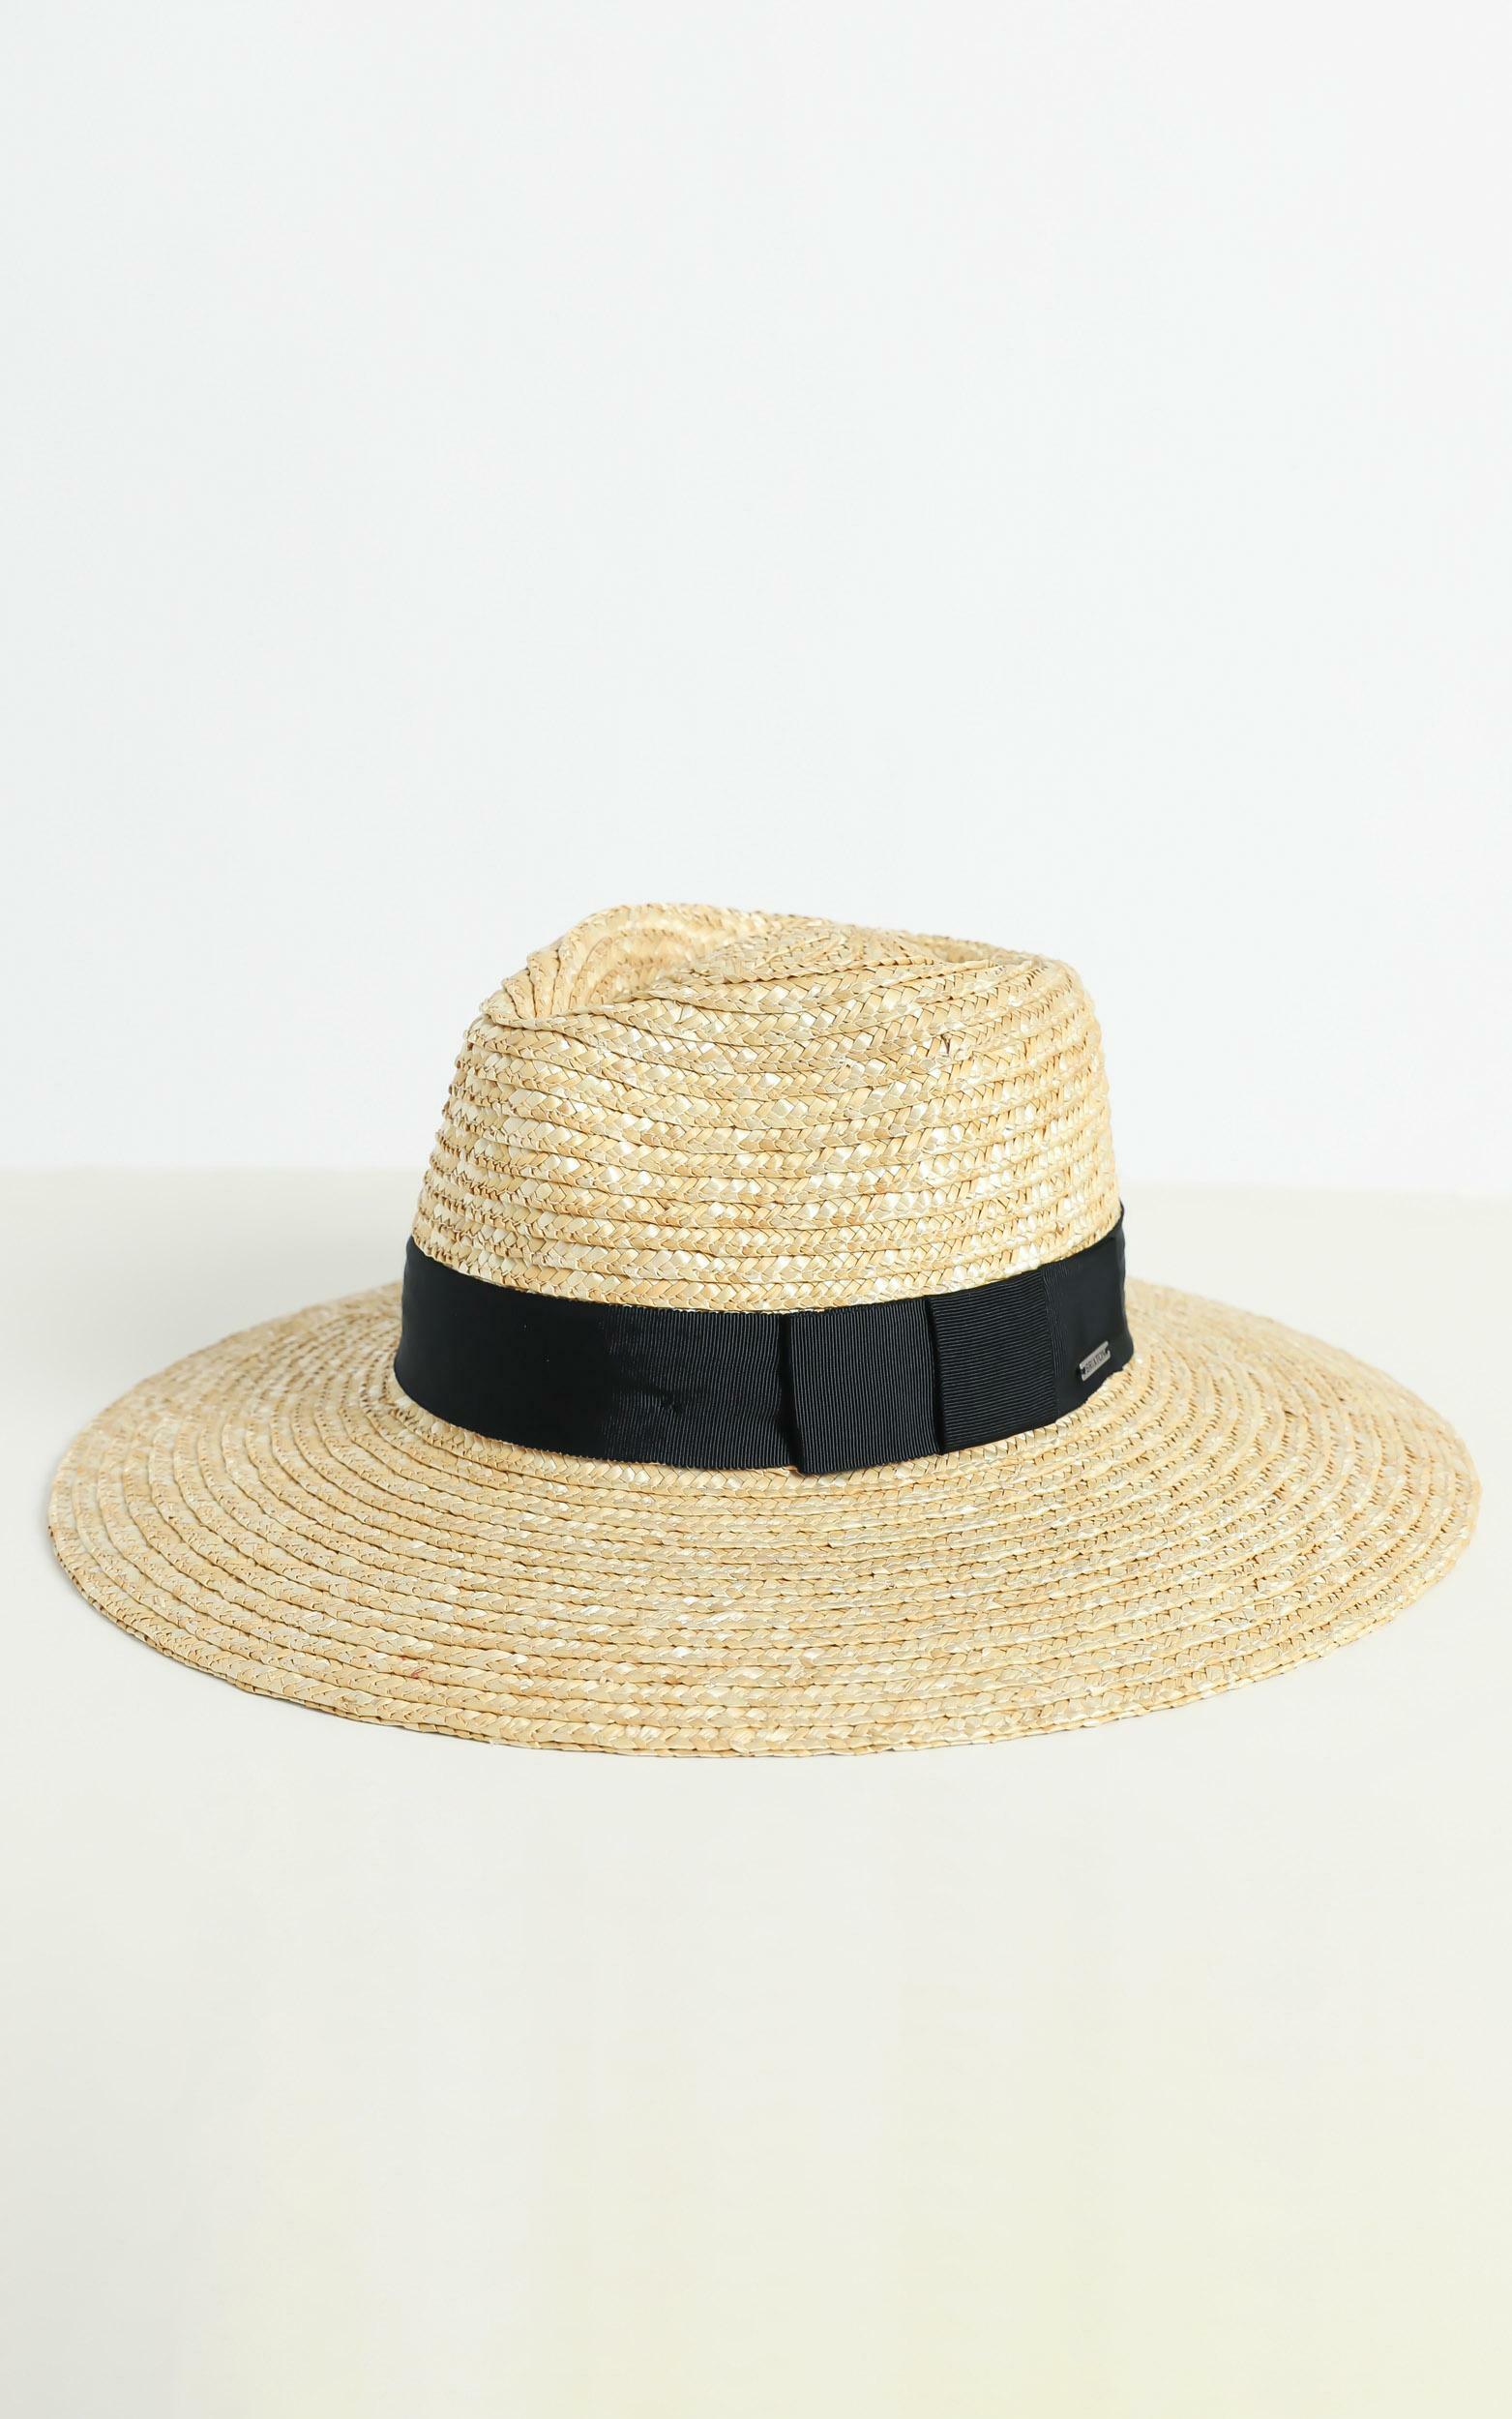 Brixton - Joanna Hat in Honey - XS, CRE2, hi-res image number null